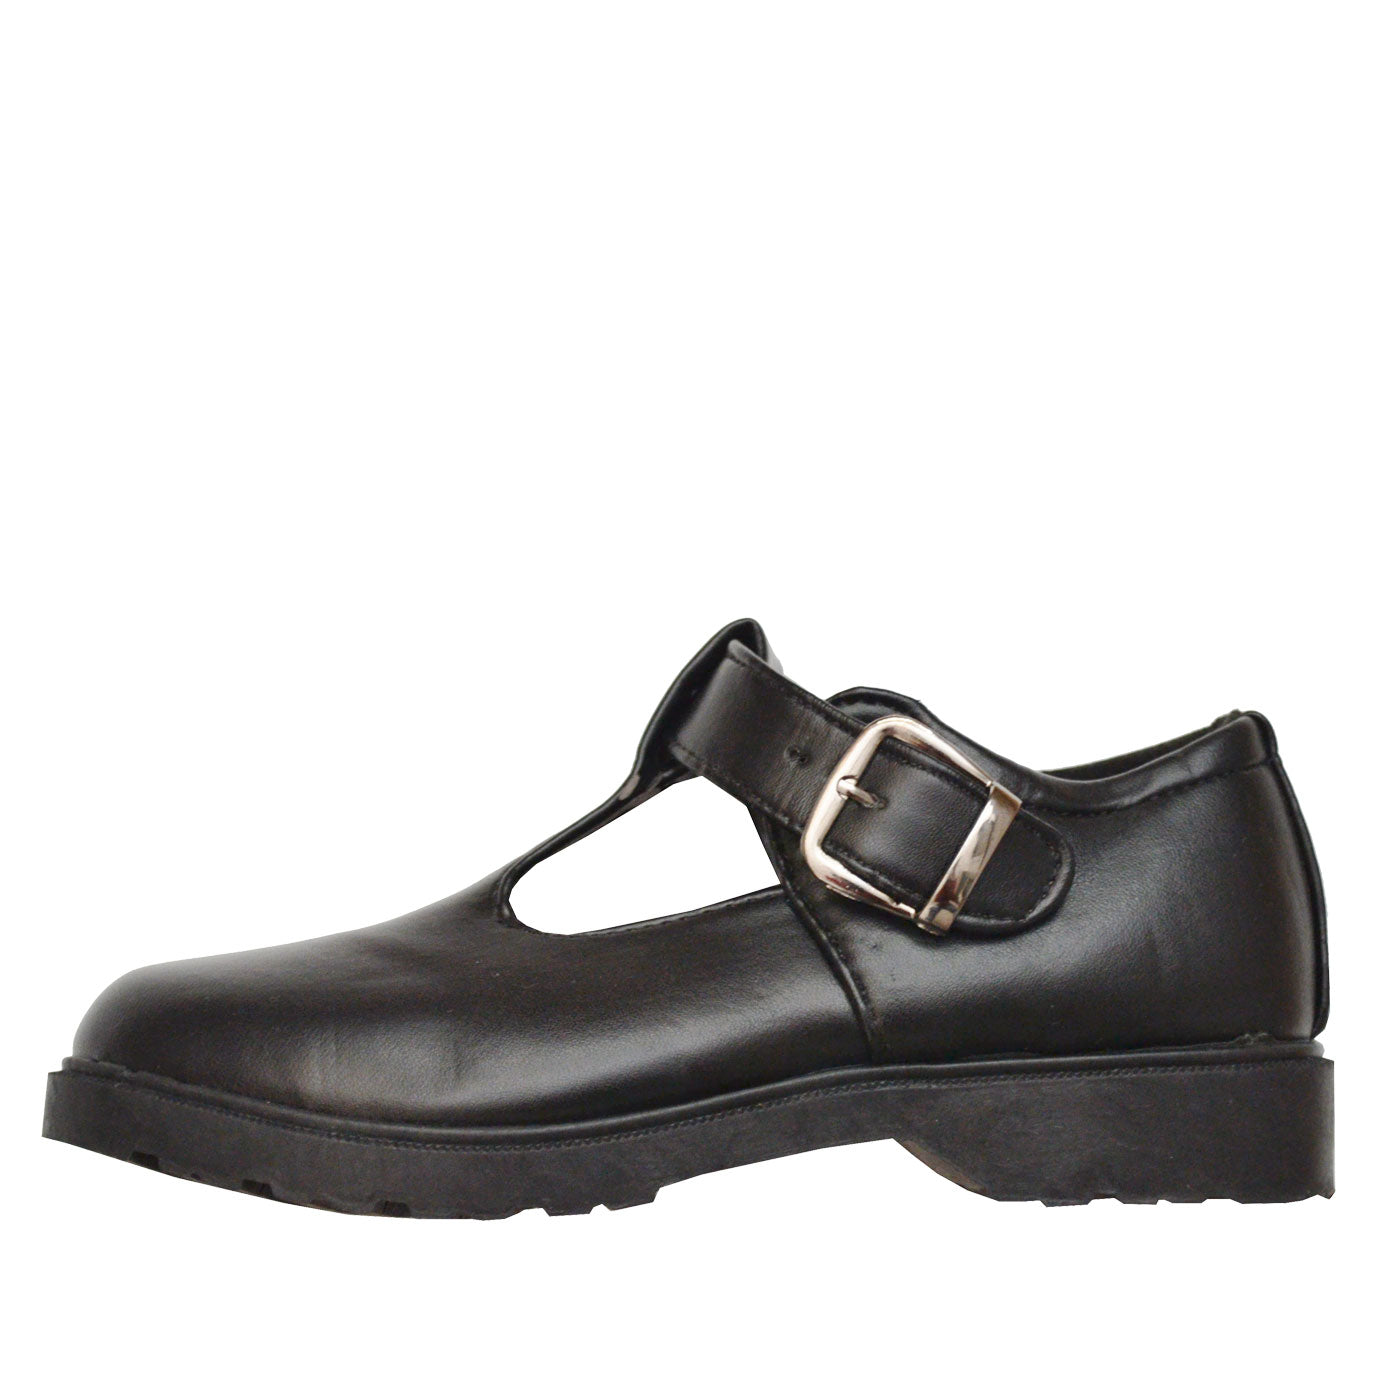 School Shoes for Girls Black Mary Jane Style